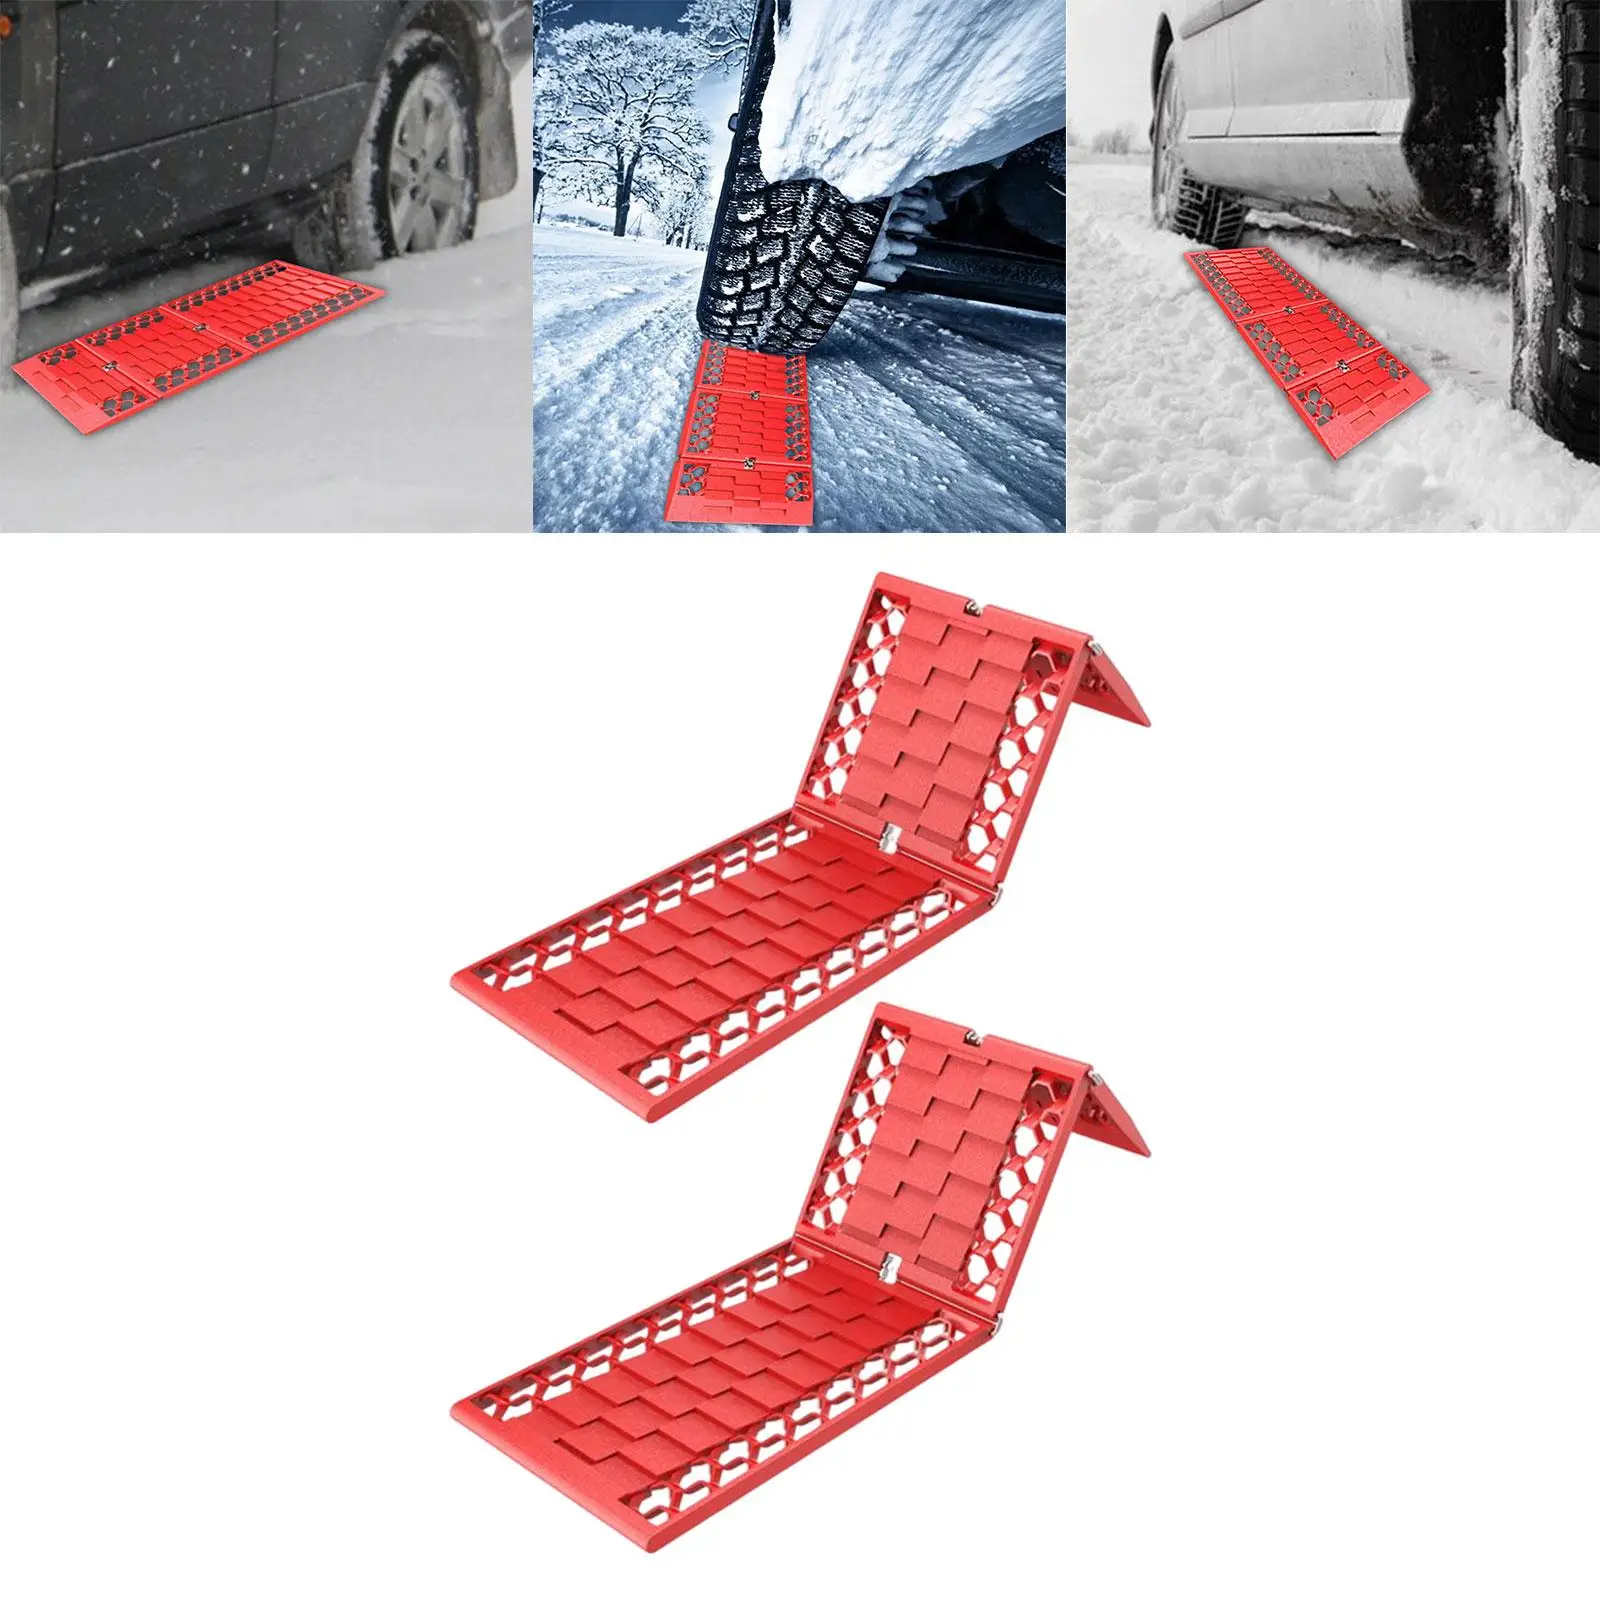 2Pcs Portable Traction Boards Tire Grip Grabber Off Roading Traction Track for